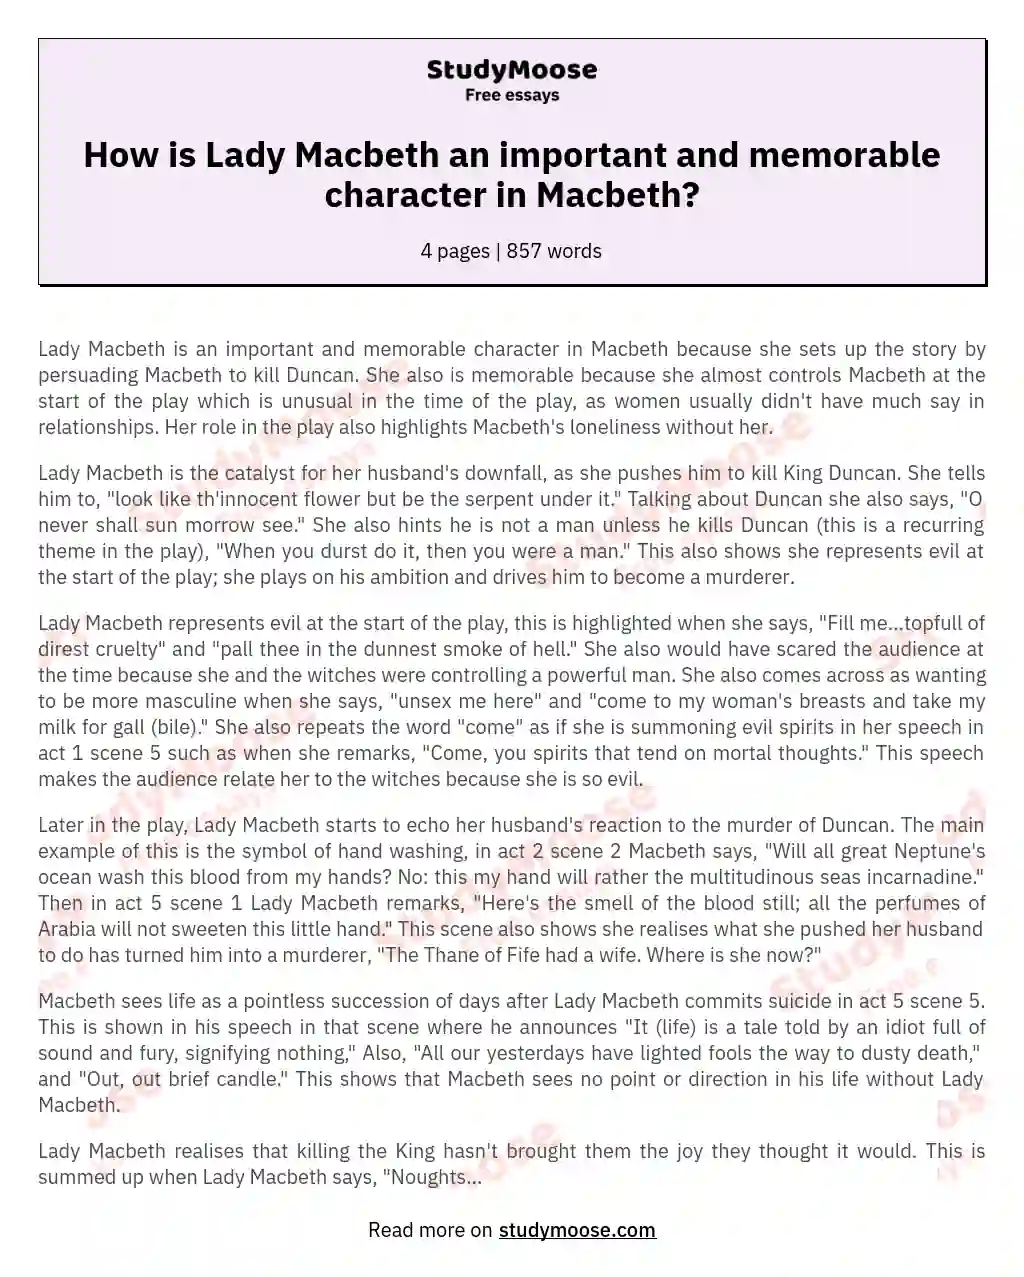 How is Lady Macbeth an important and memorable character in Macbeth?